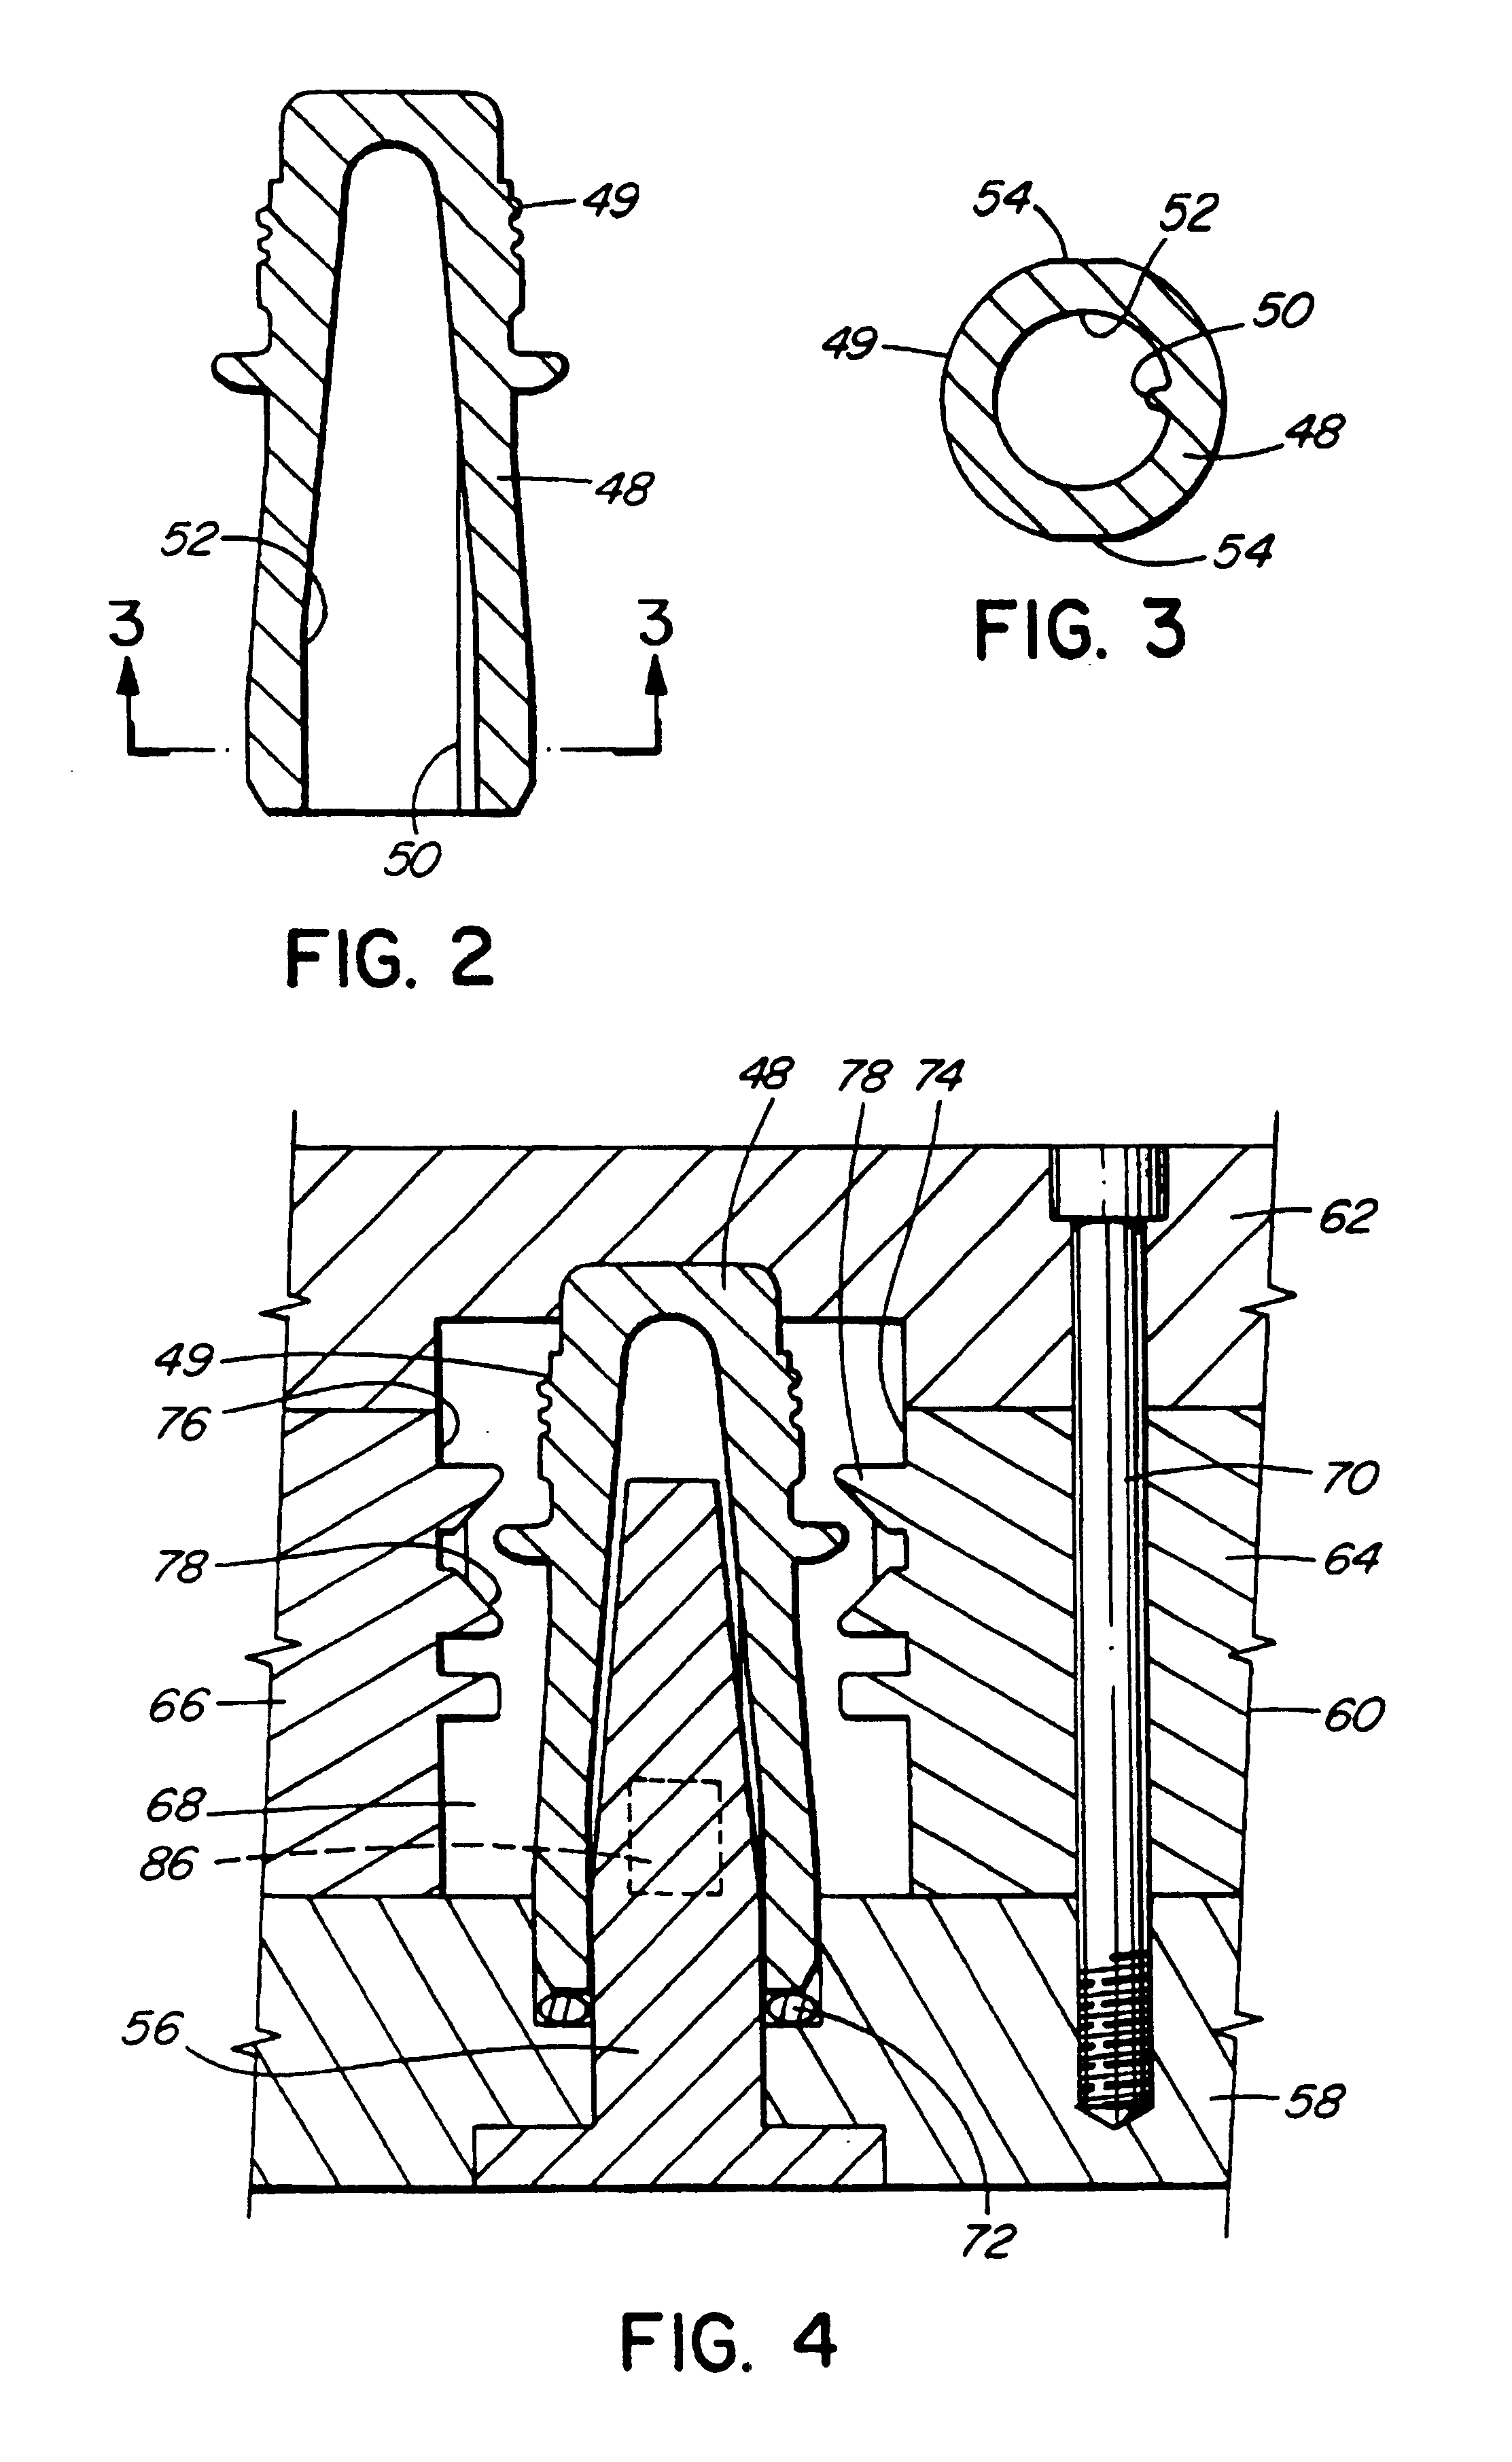 Method of making injection molding cooled thread split inserts